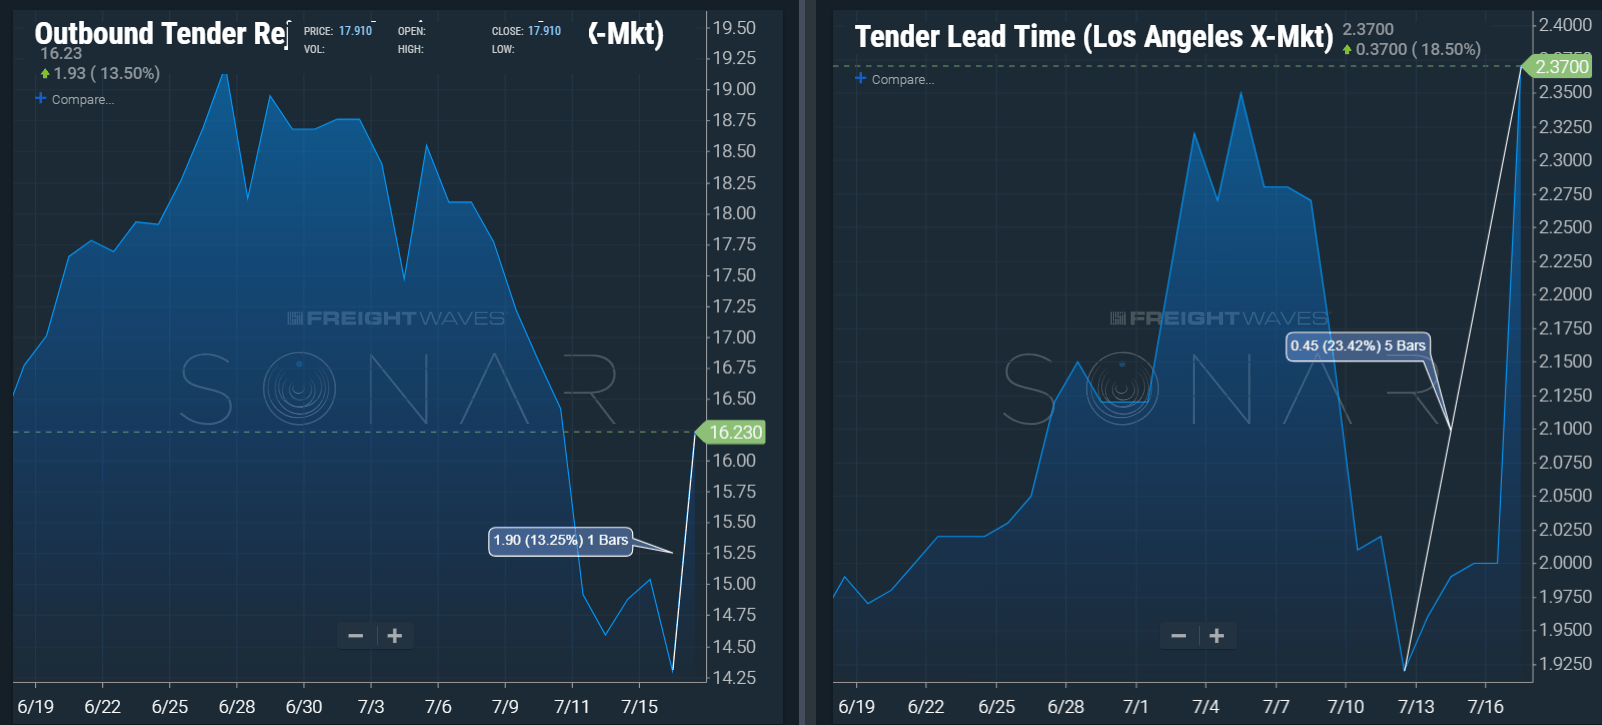  Image: SONAR OTRI.LAX and TLT.LAX illustrating a 13.25% increase in tender rejection rate in a single day and 23.42% increase in tender lead time over the past 5 days in the outbound Los Angeles market. 